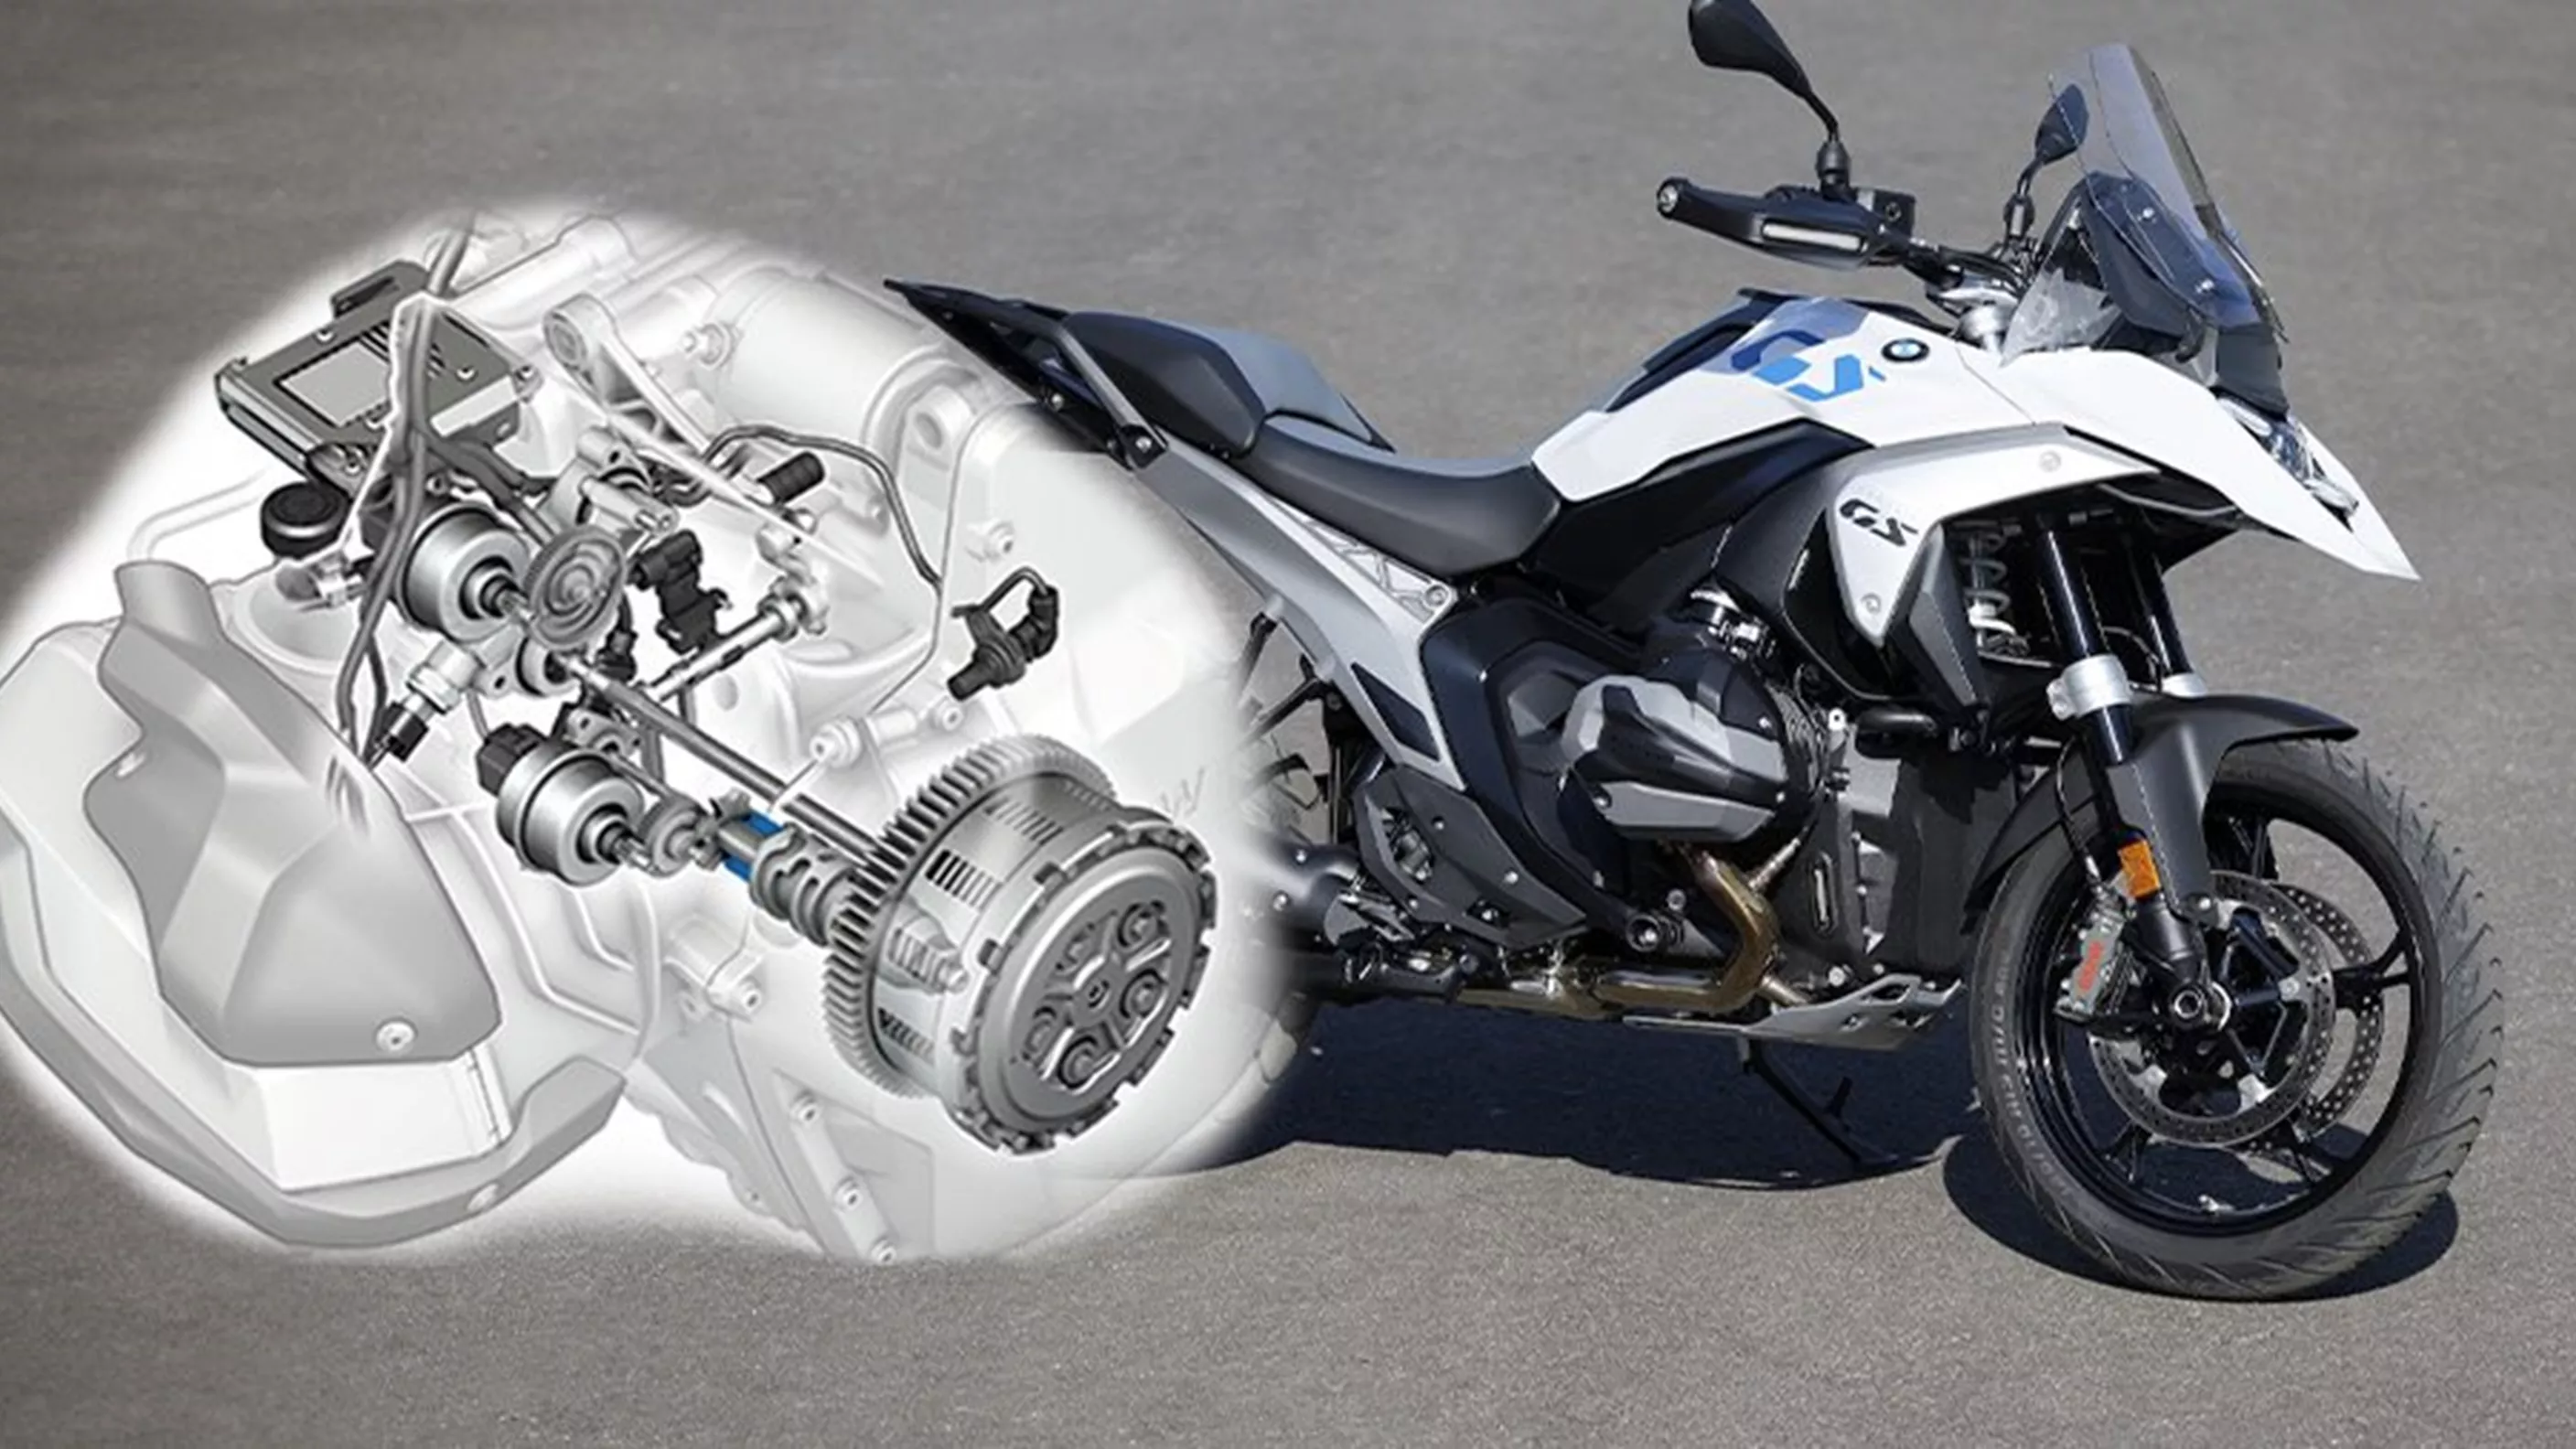 New ASA automatic transmission presented in BMW R 1300 GS